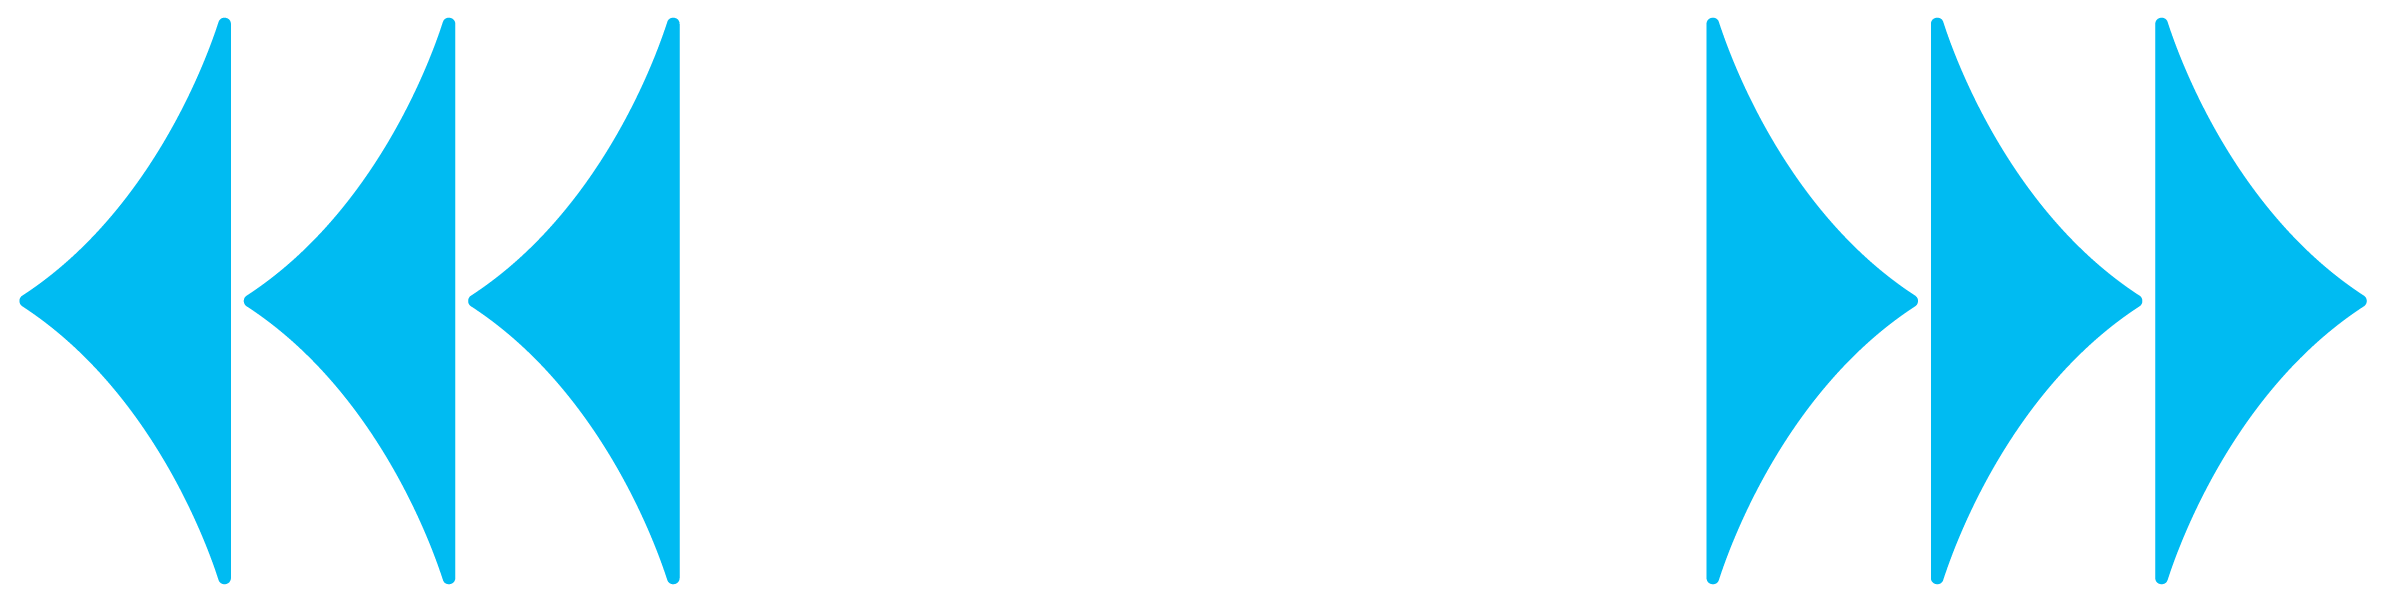 Allen Sound - The Art of Record Making 